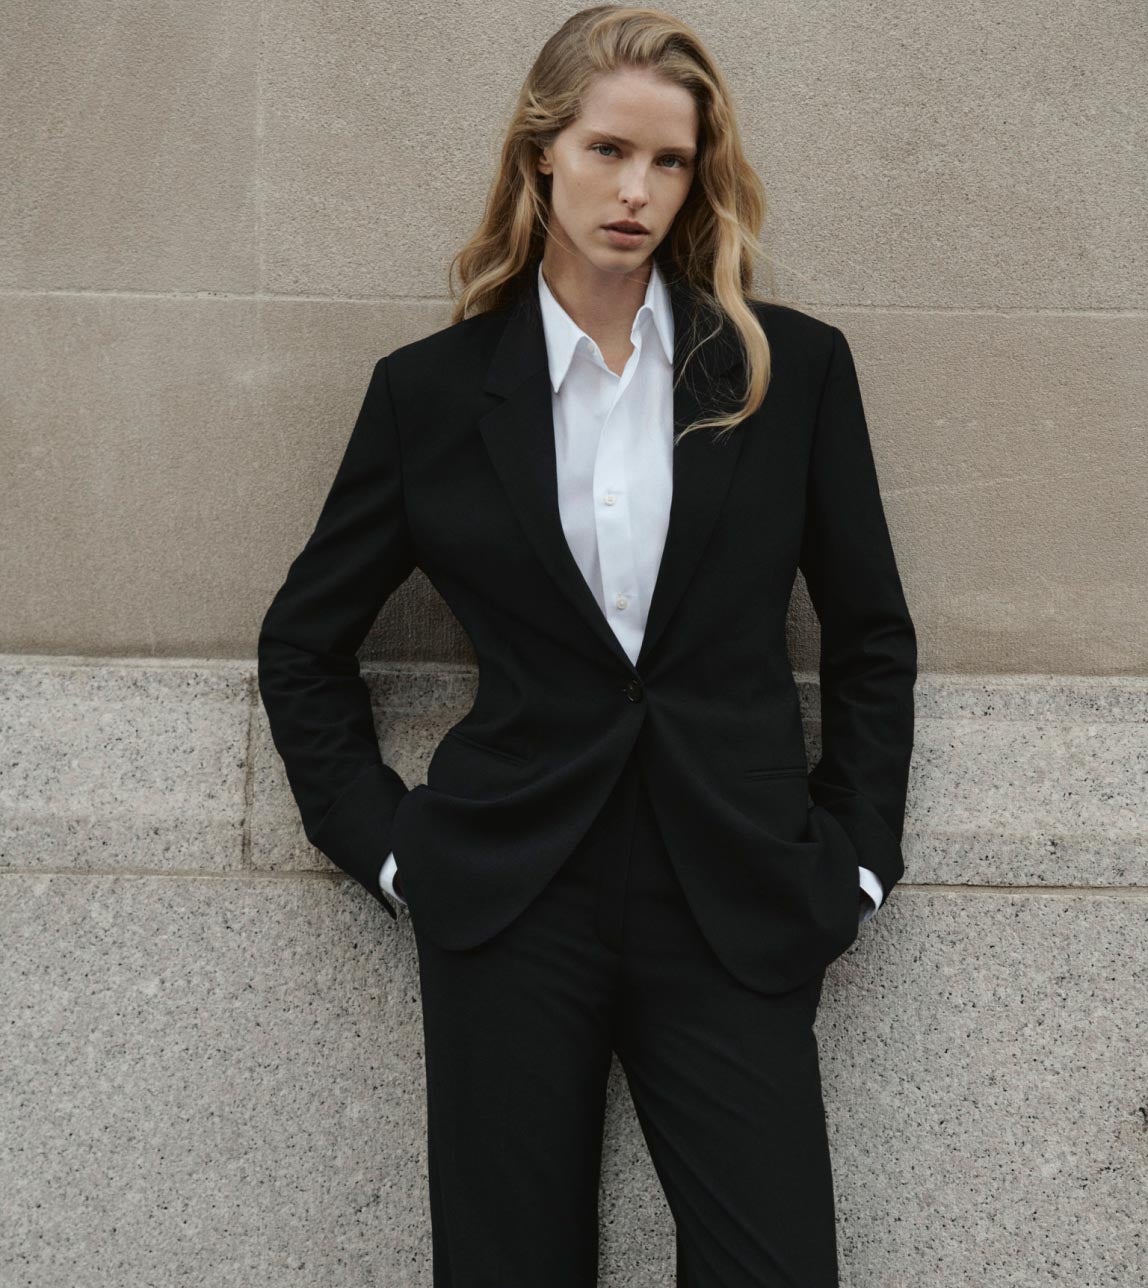 Woman posing with her hands in her pockets wearing a tailored black blazer and tailored white shirt